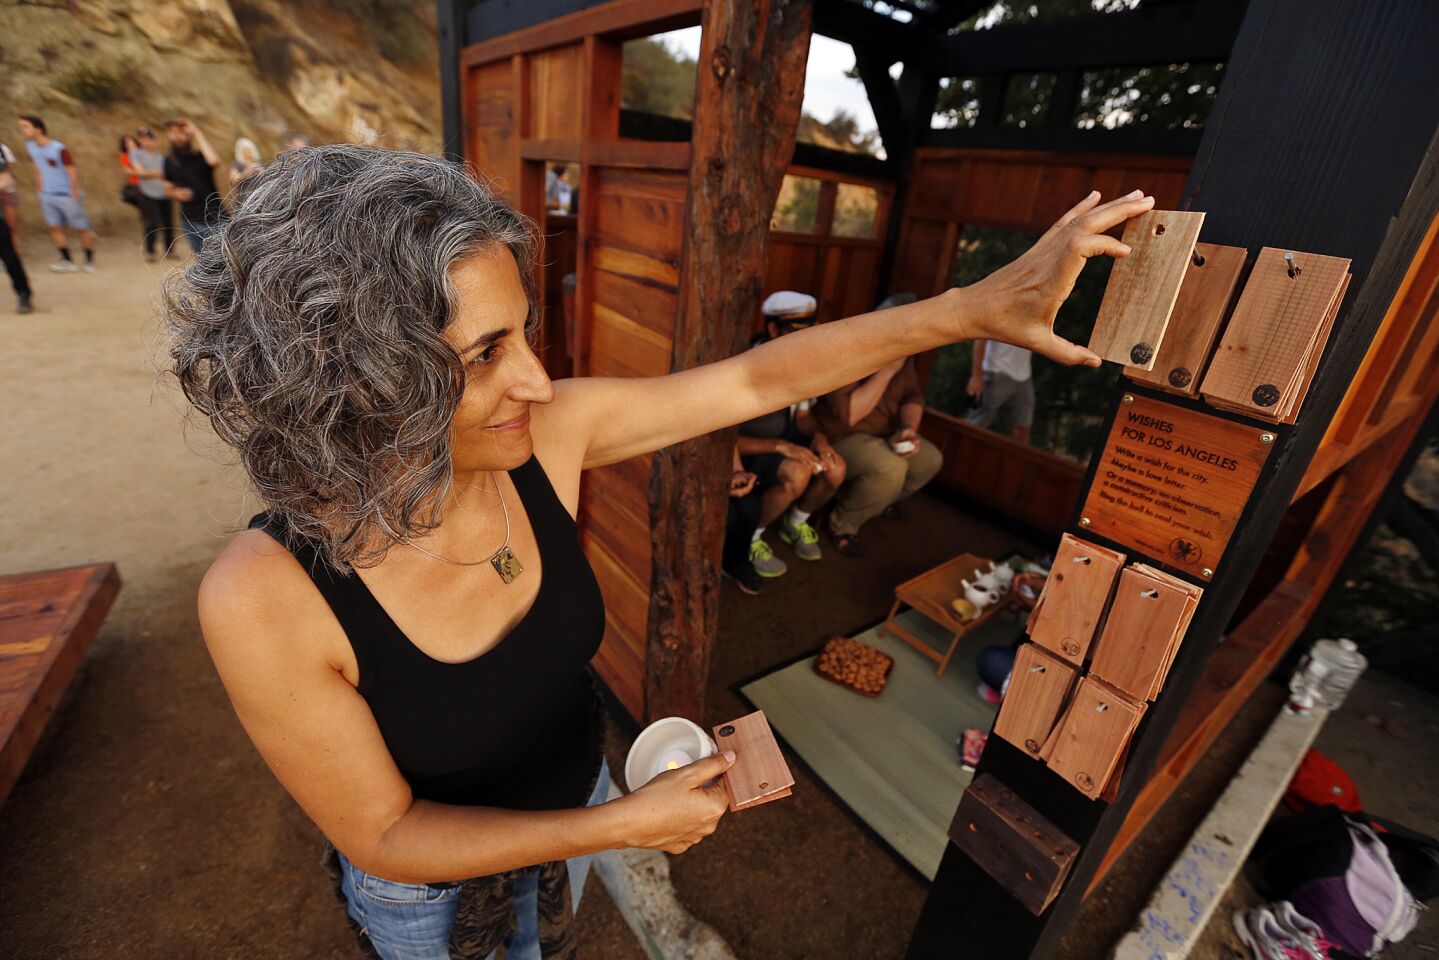 The artists left behind small wooden cards where visitors can write a wish, a memory or a love letter to Los Angeles.